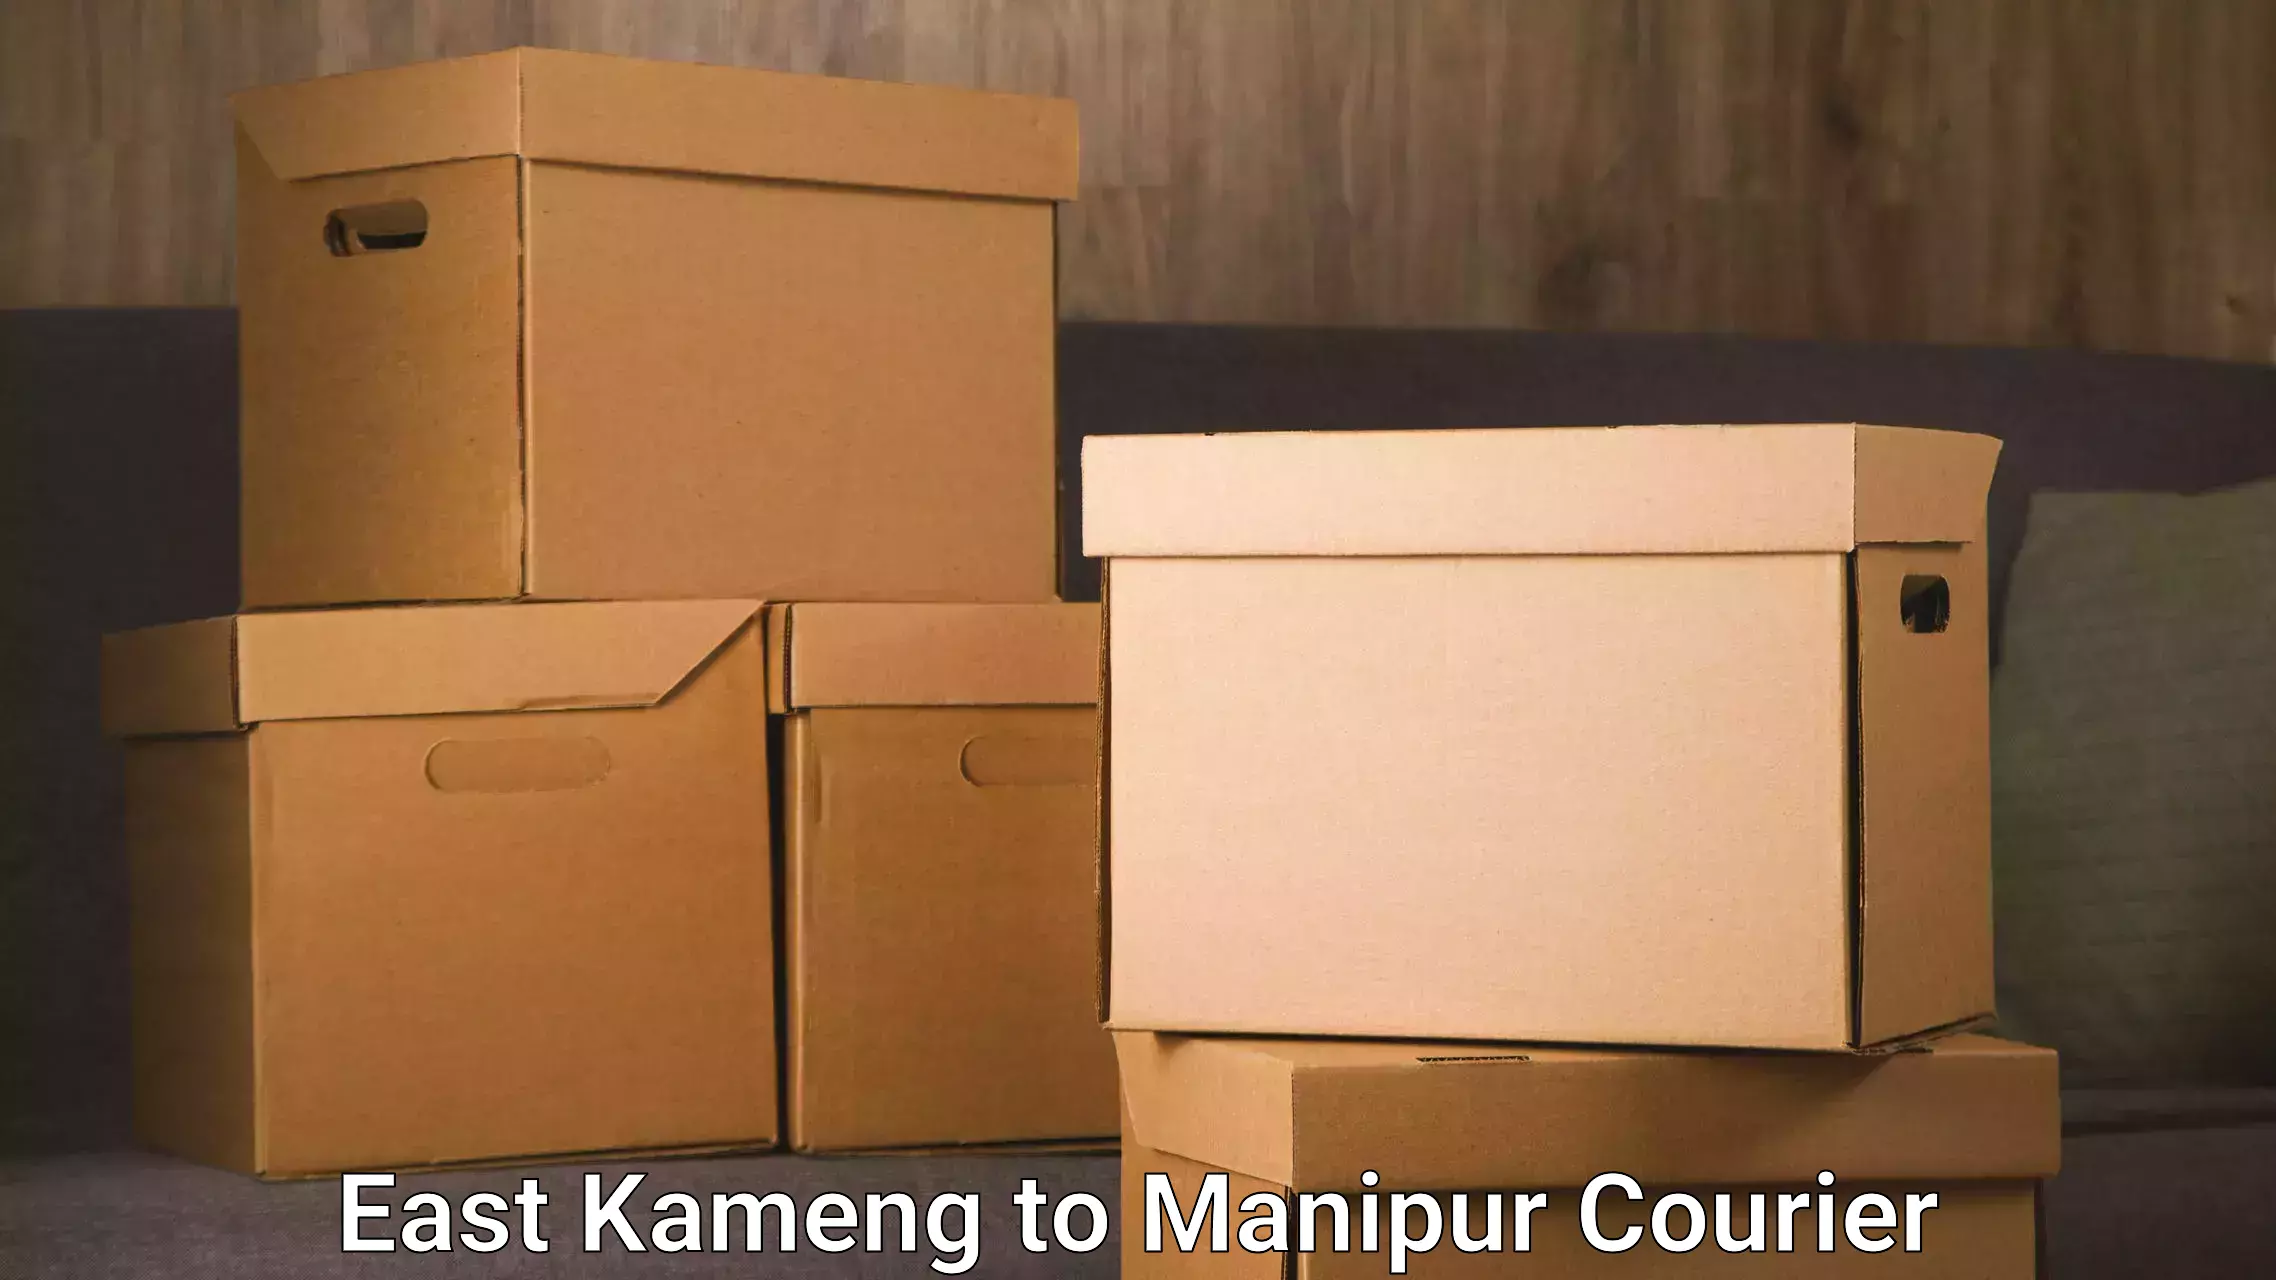 Efficient freight service East Kameng to Manipur